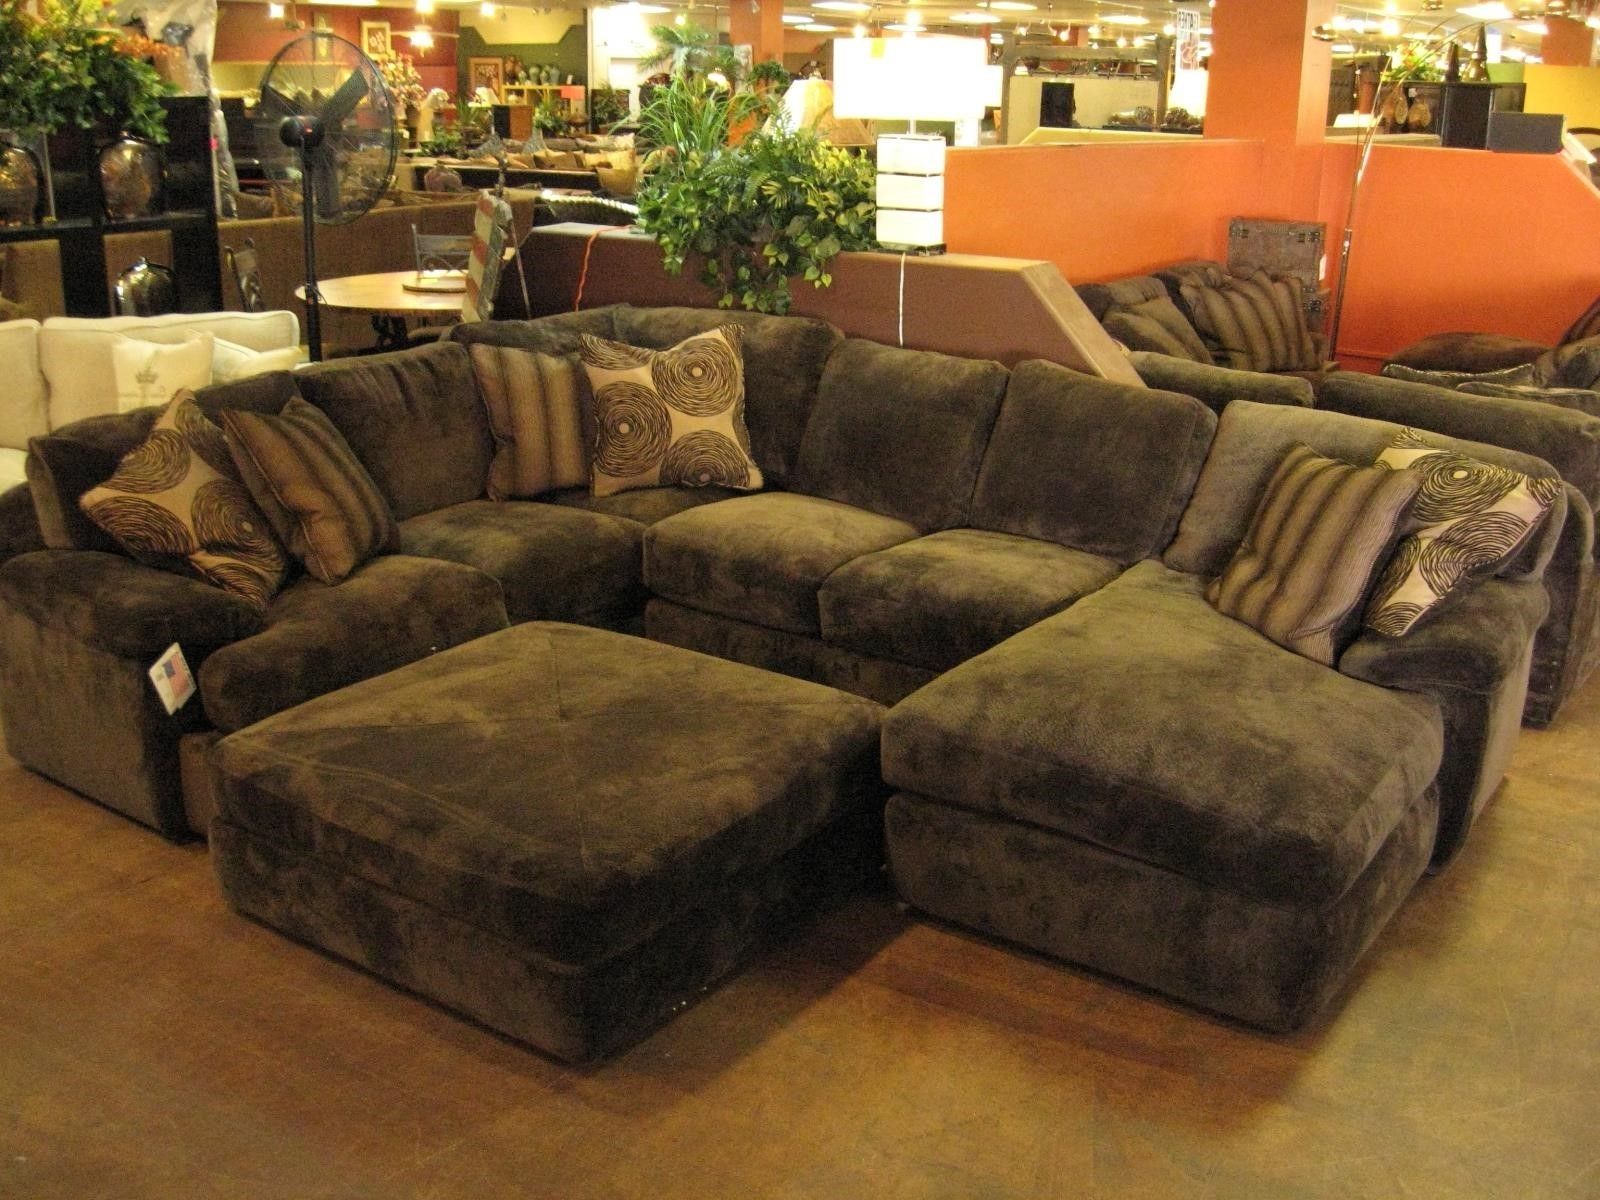 Good Large Sectional Sofa With Ottoman 97 For Sofas And Couches Inside Sectional Sofas With Oversized Ottoman (Photo 6227 of 7825)